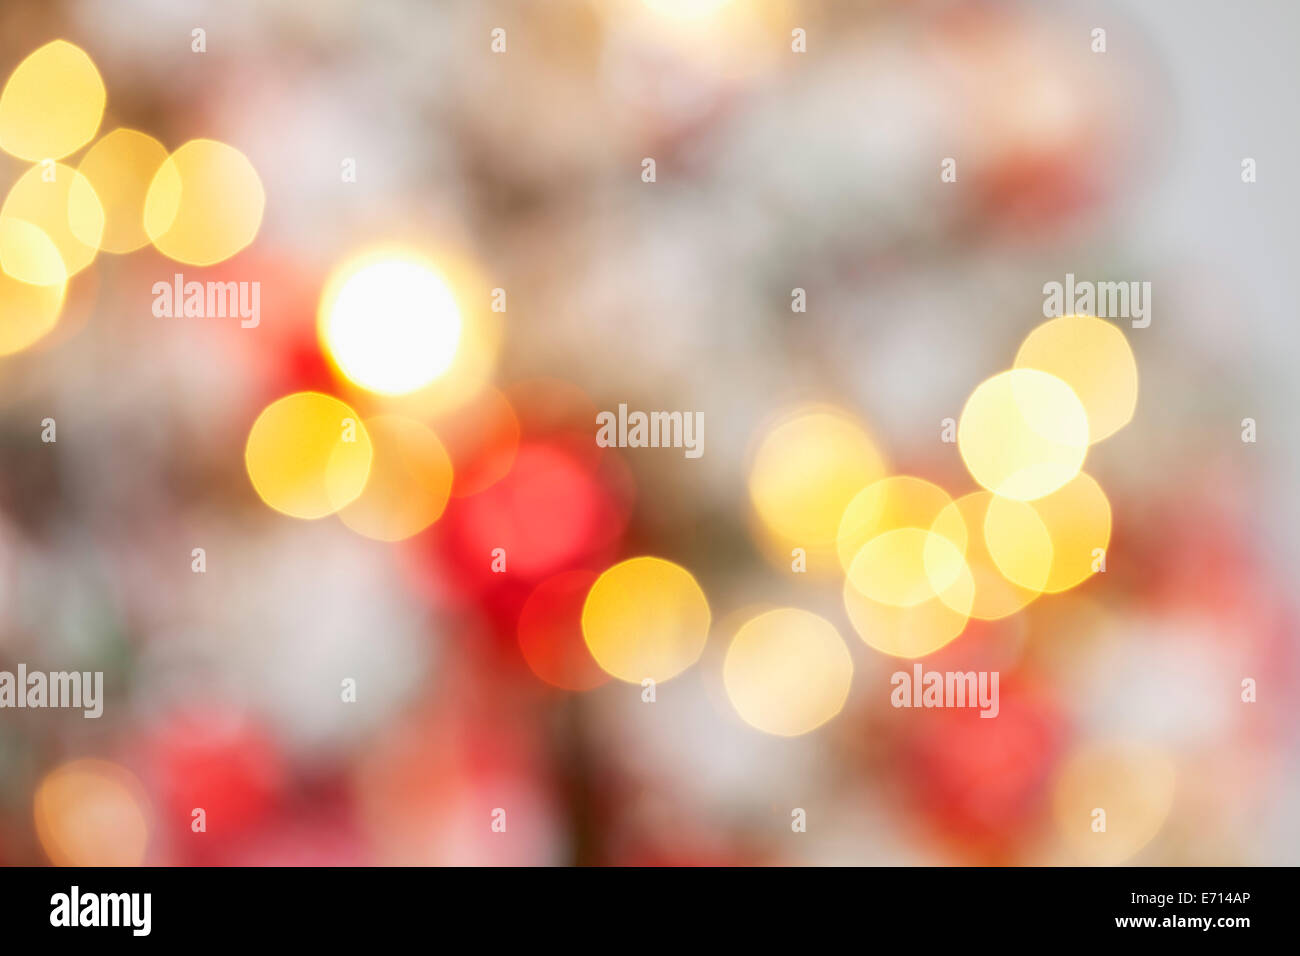 Blurred flares at christmas time Stock Photo